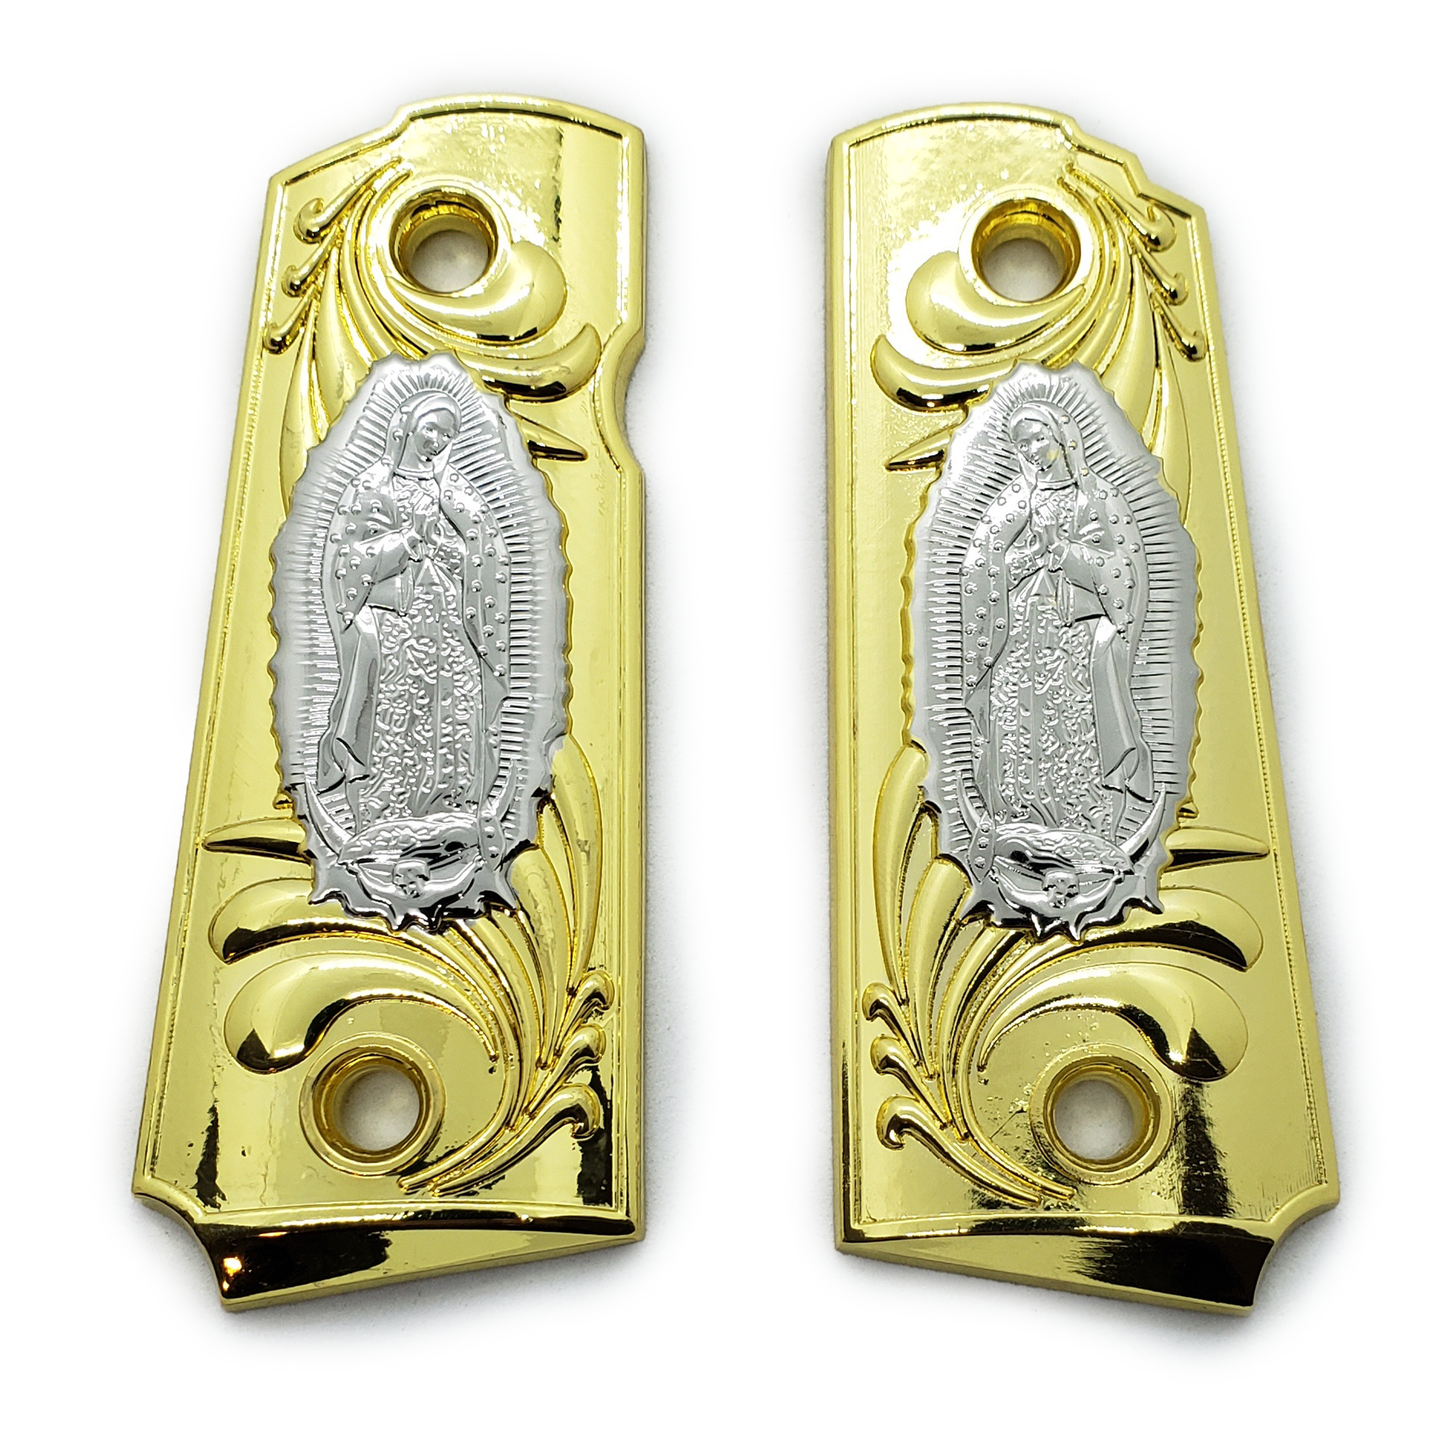 1911 Metal grips gold / Nickel Virgin Mary Lady of Guadalupe Ambi Safety #T-M101